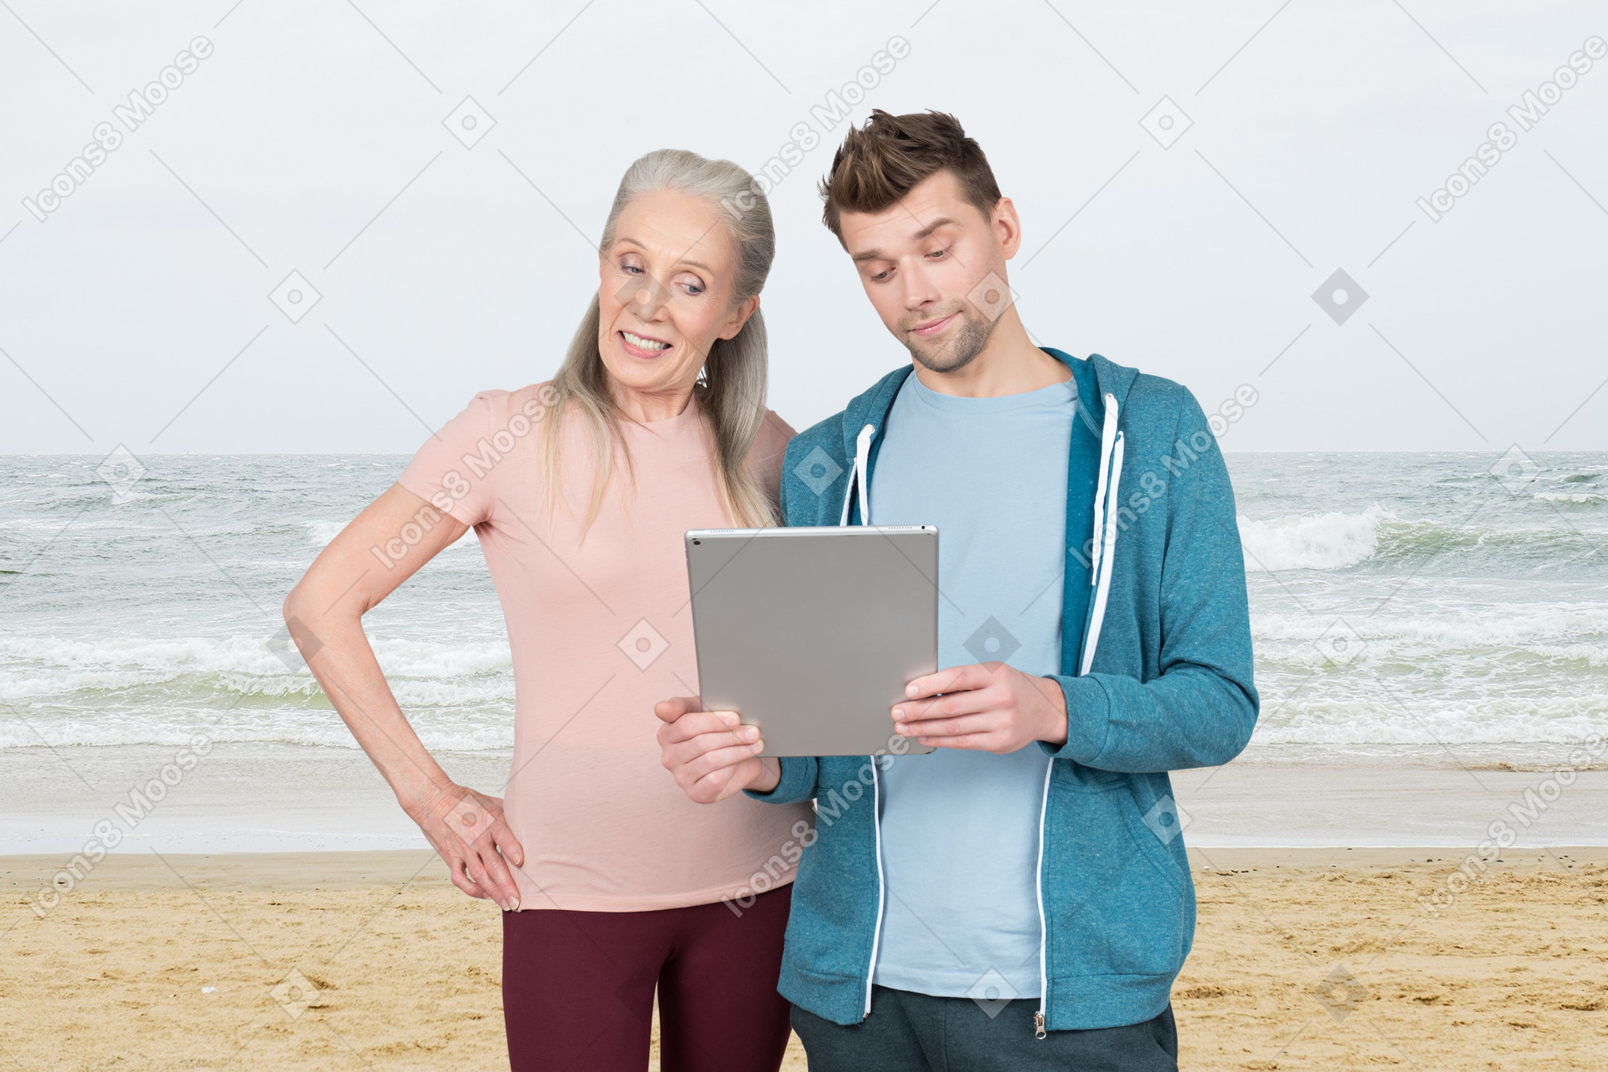 A couple standing on the beach using a laptop